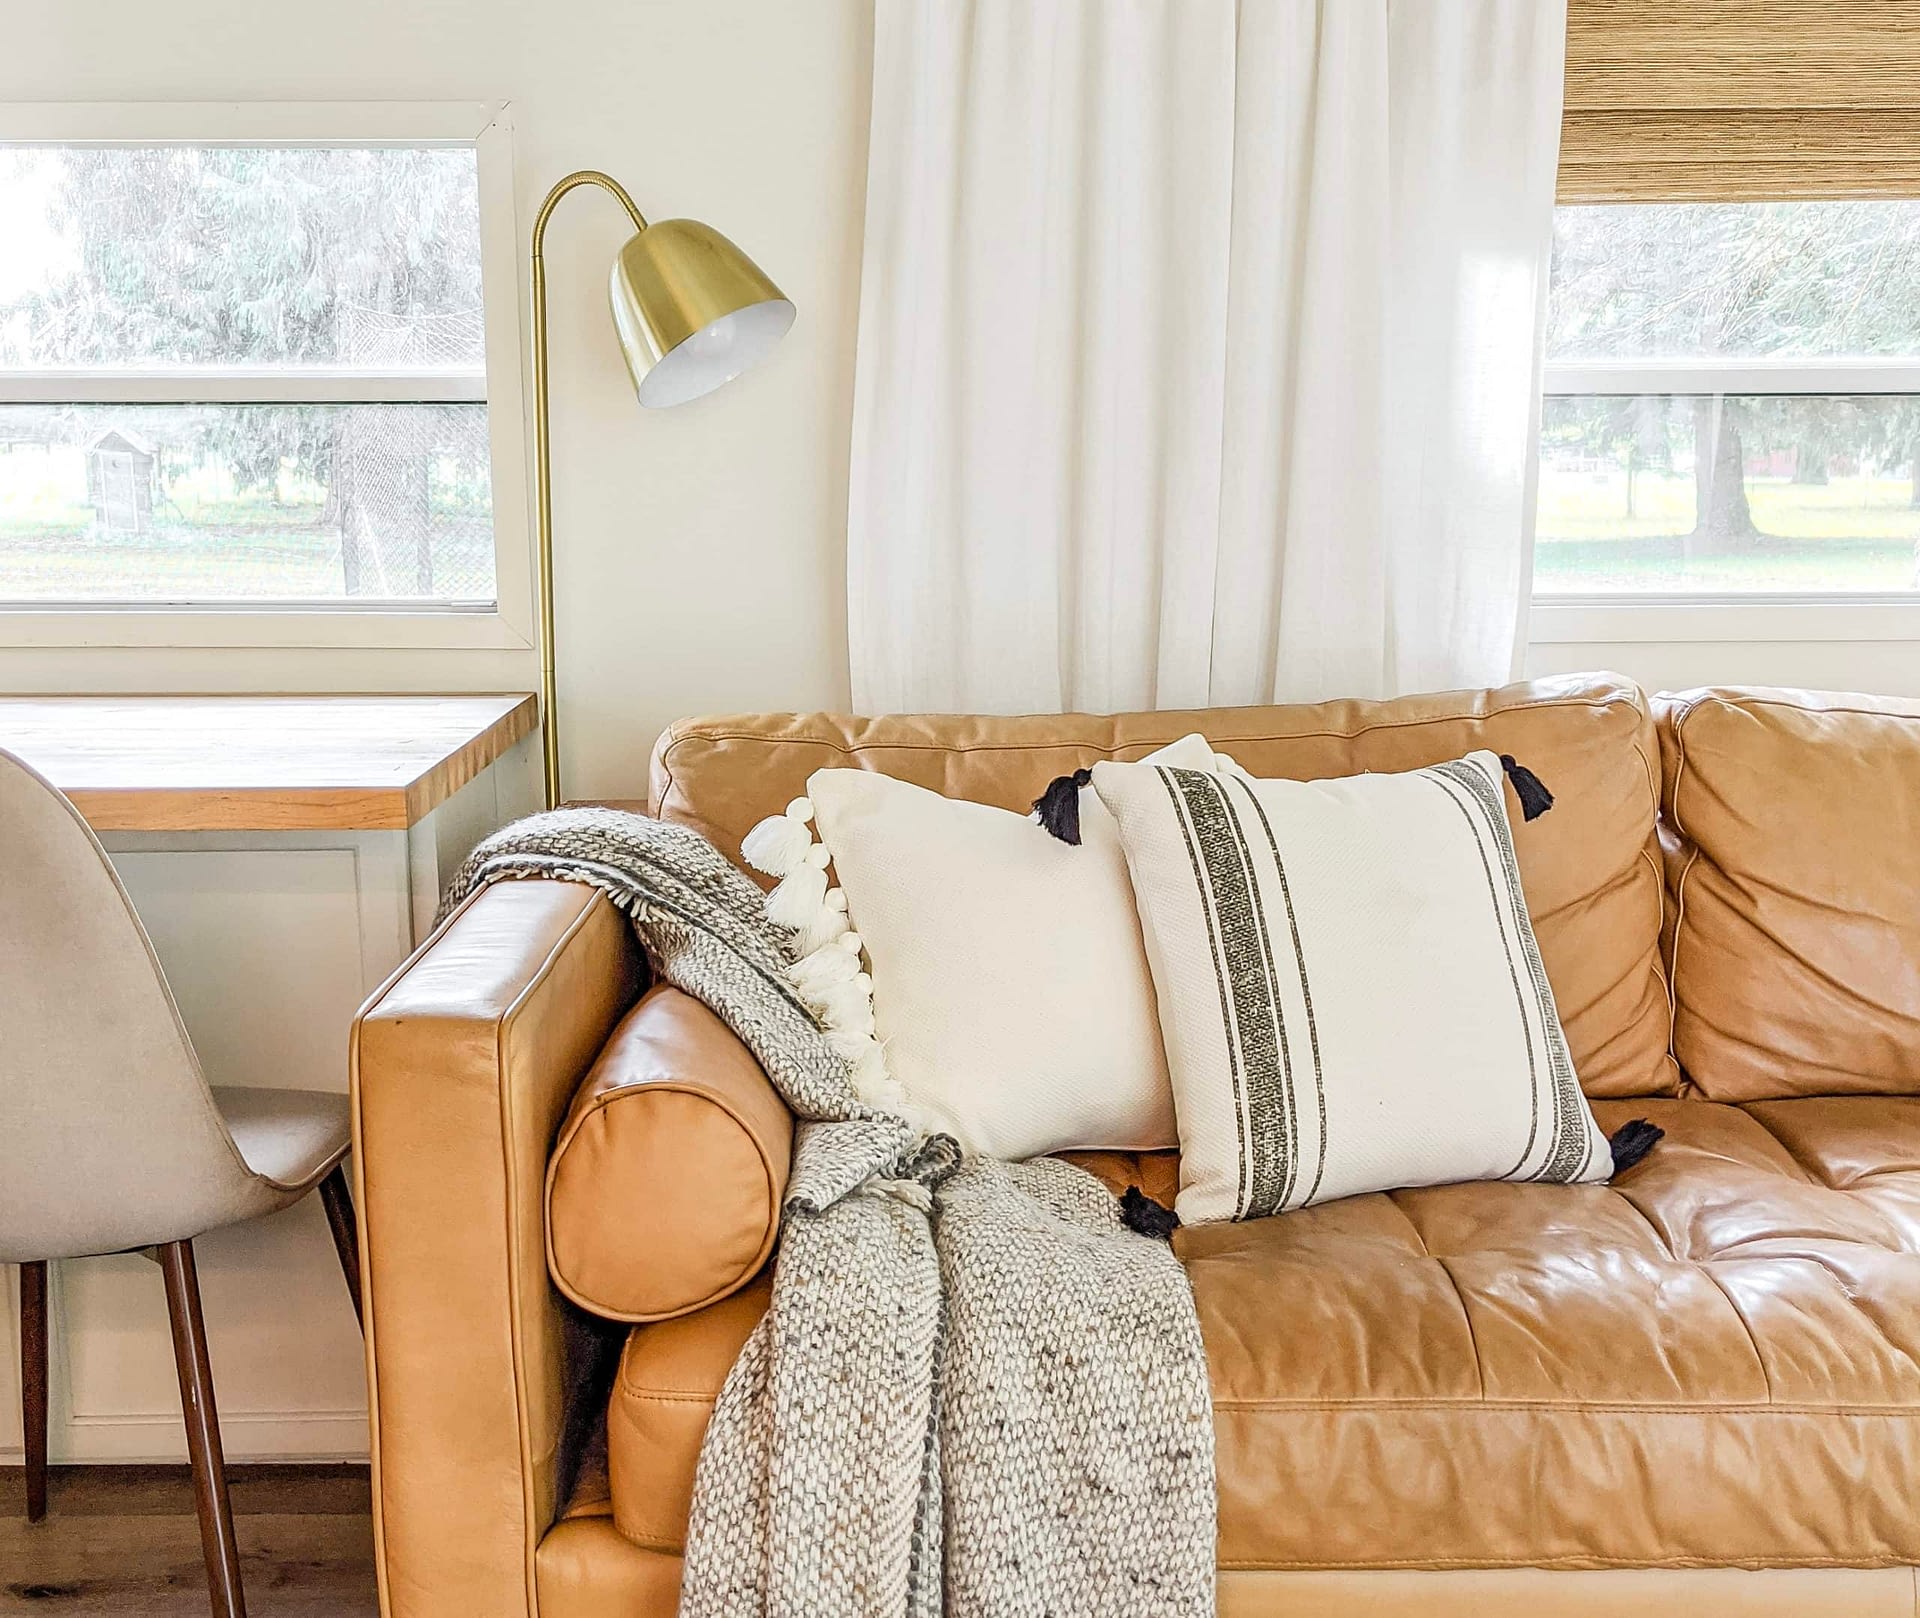 10 Pillow Combinations For Brown Couch, Accent Pillows On Leather Sofa